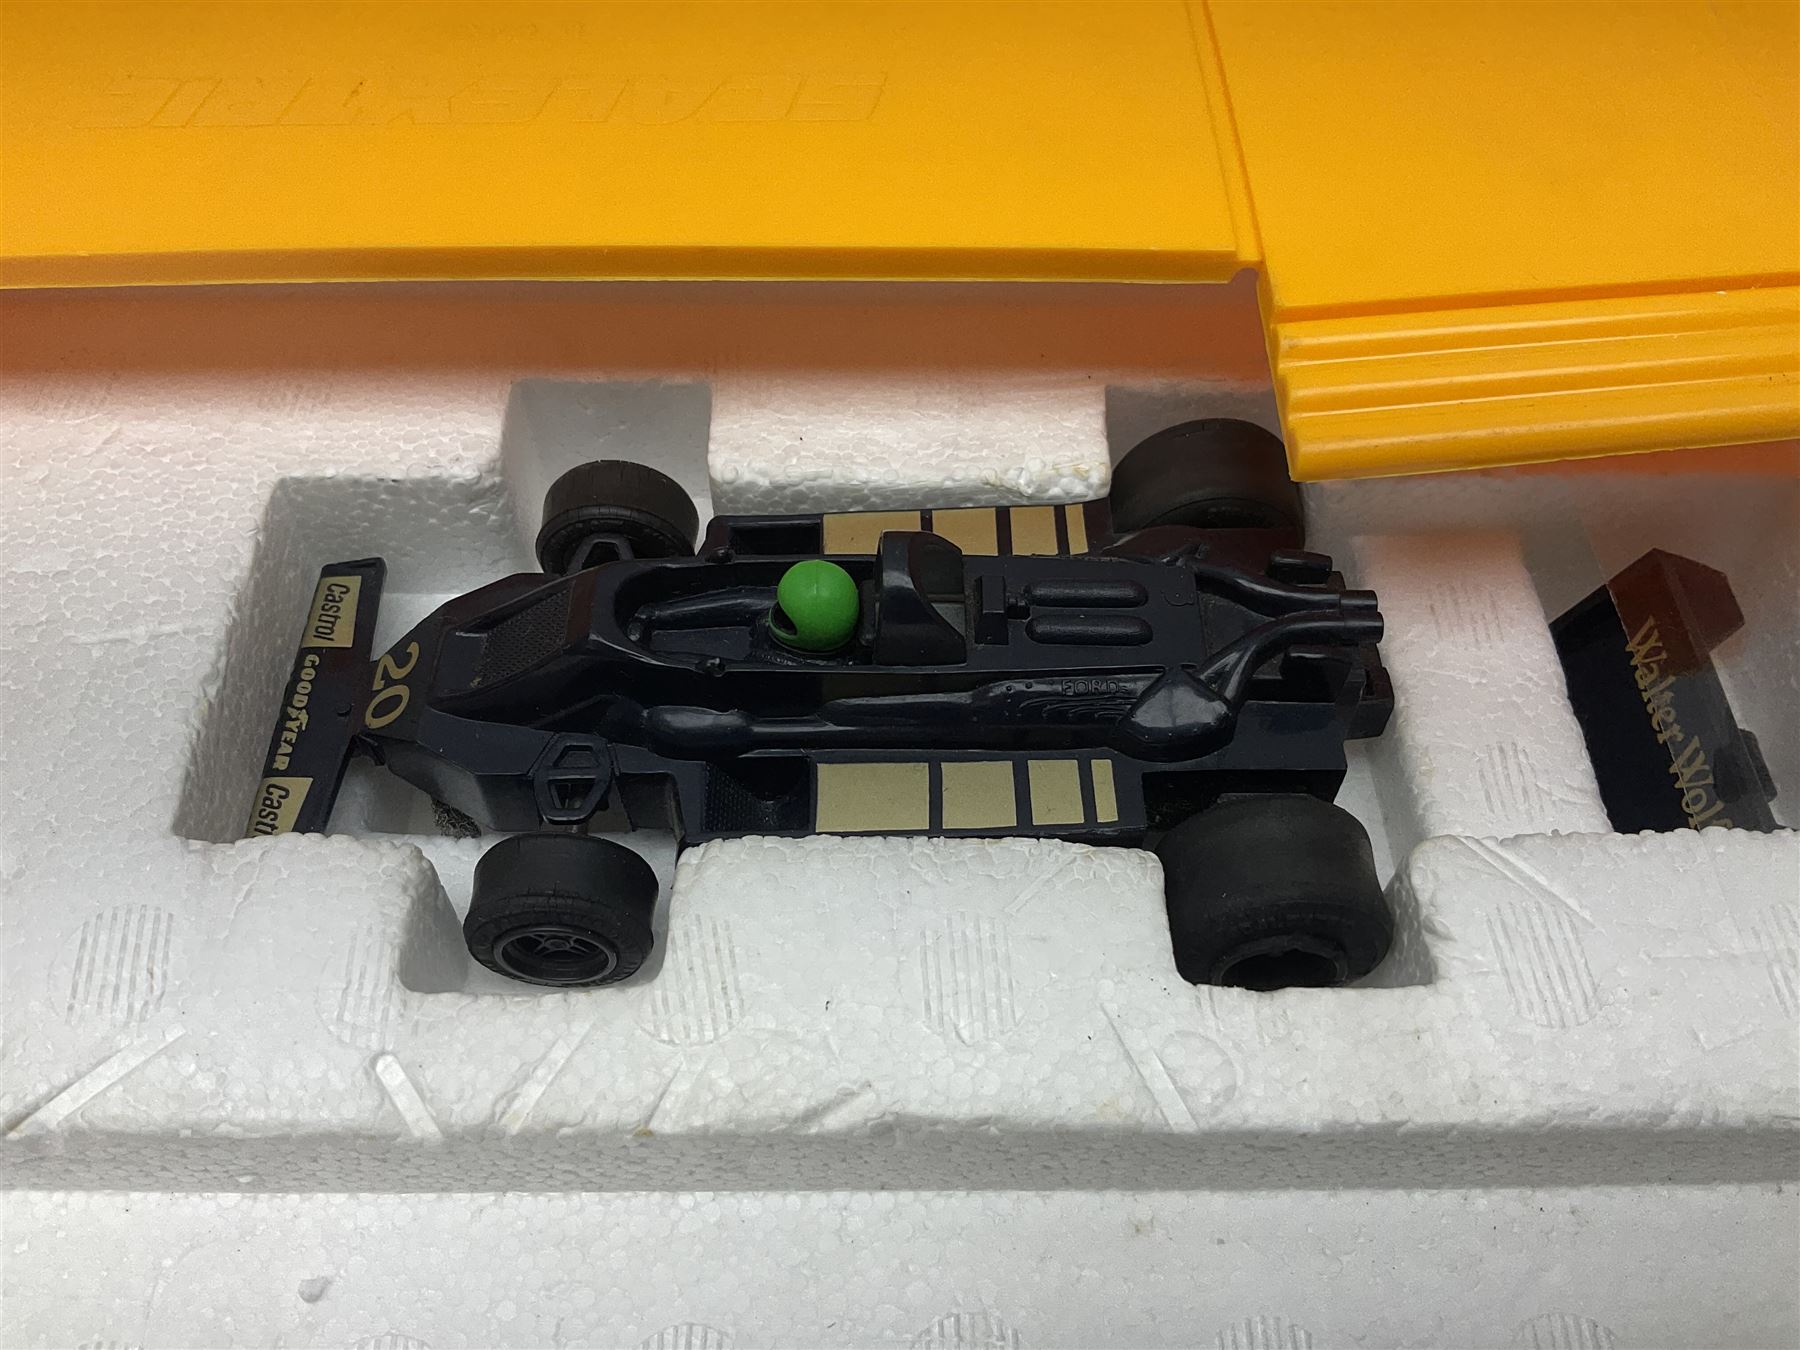 Scalextric - Pole Position set with Team Talbot and Wolf racing cars; boxed with paperwork - Image 5 of 5